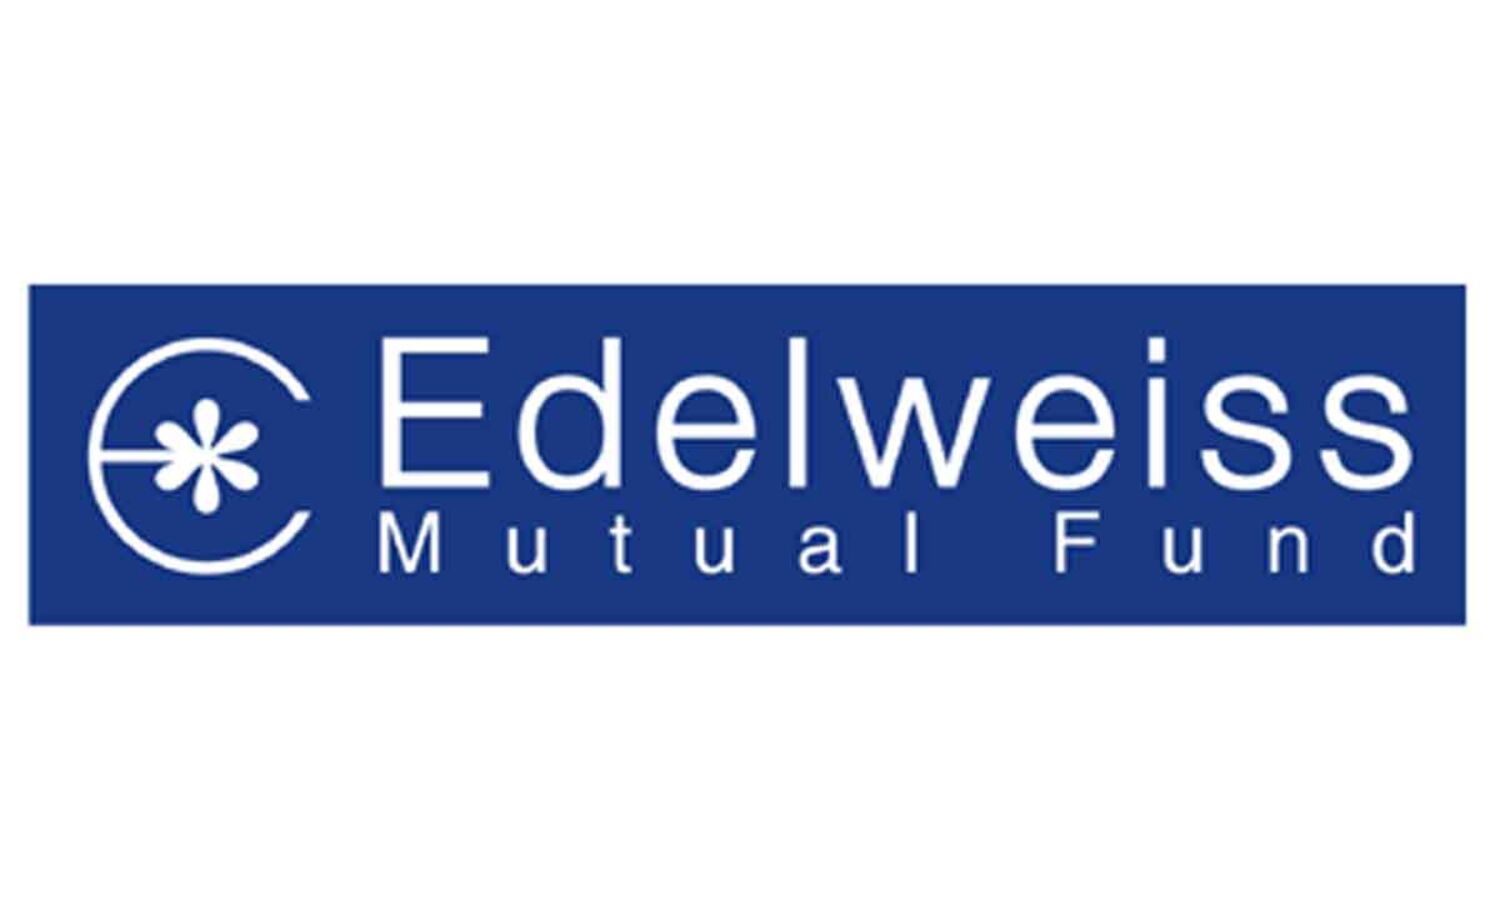 Edelweiss Financial Services NCD July 2023 - Effective Yield 10.46% p.a. |  IPO Watch